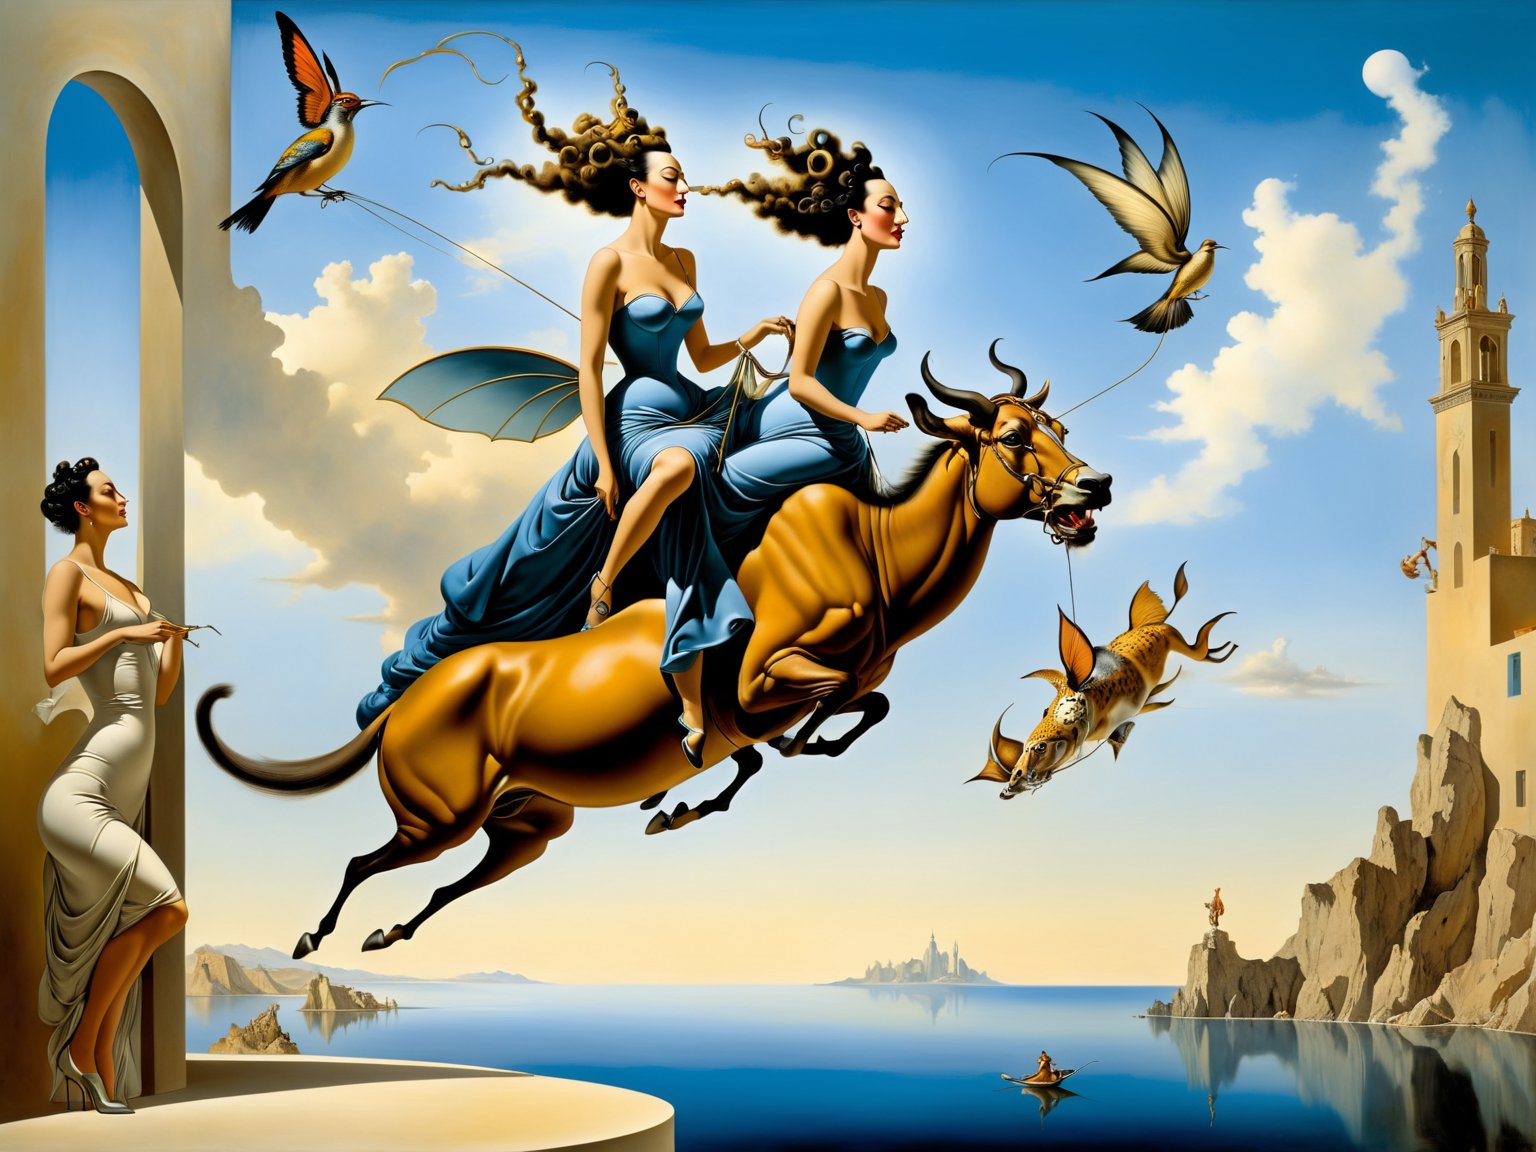 lets se what can you do give me your best something crazy and make it good beast quality art , style of Salvador Dali, and Michael Parkes surreal scene, surrealism, surrealism painting, inspired by Dalí, surreal art
